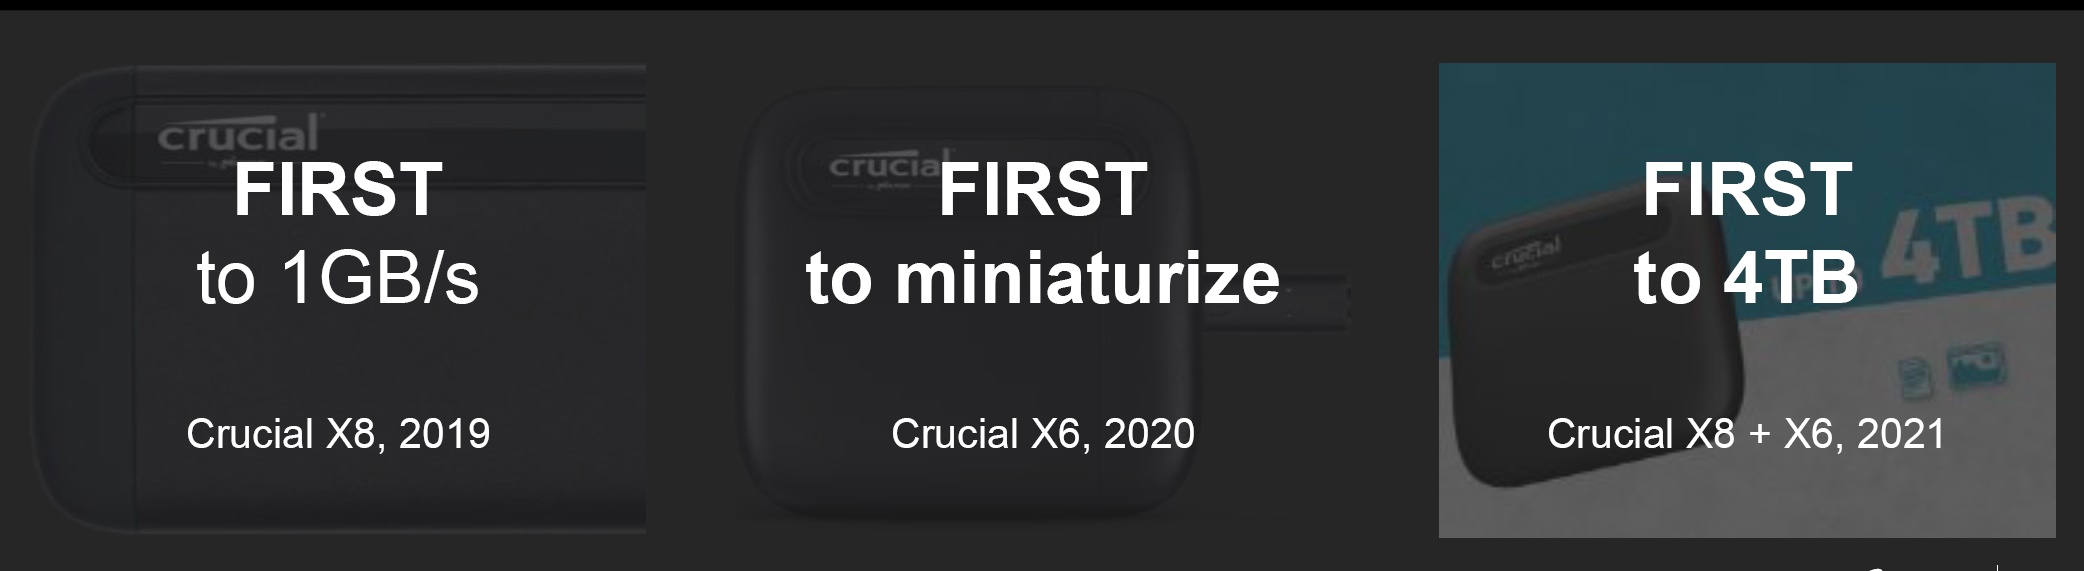 Crucial X9 Pro 1TB Portable SSD, CT1000X9PROSSD9